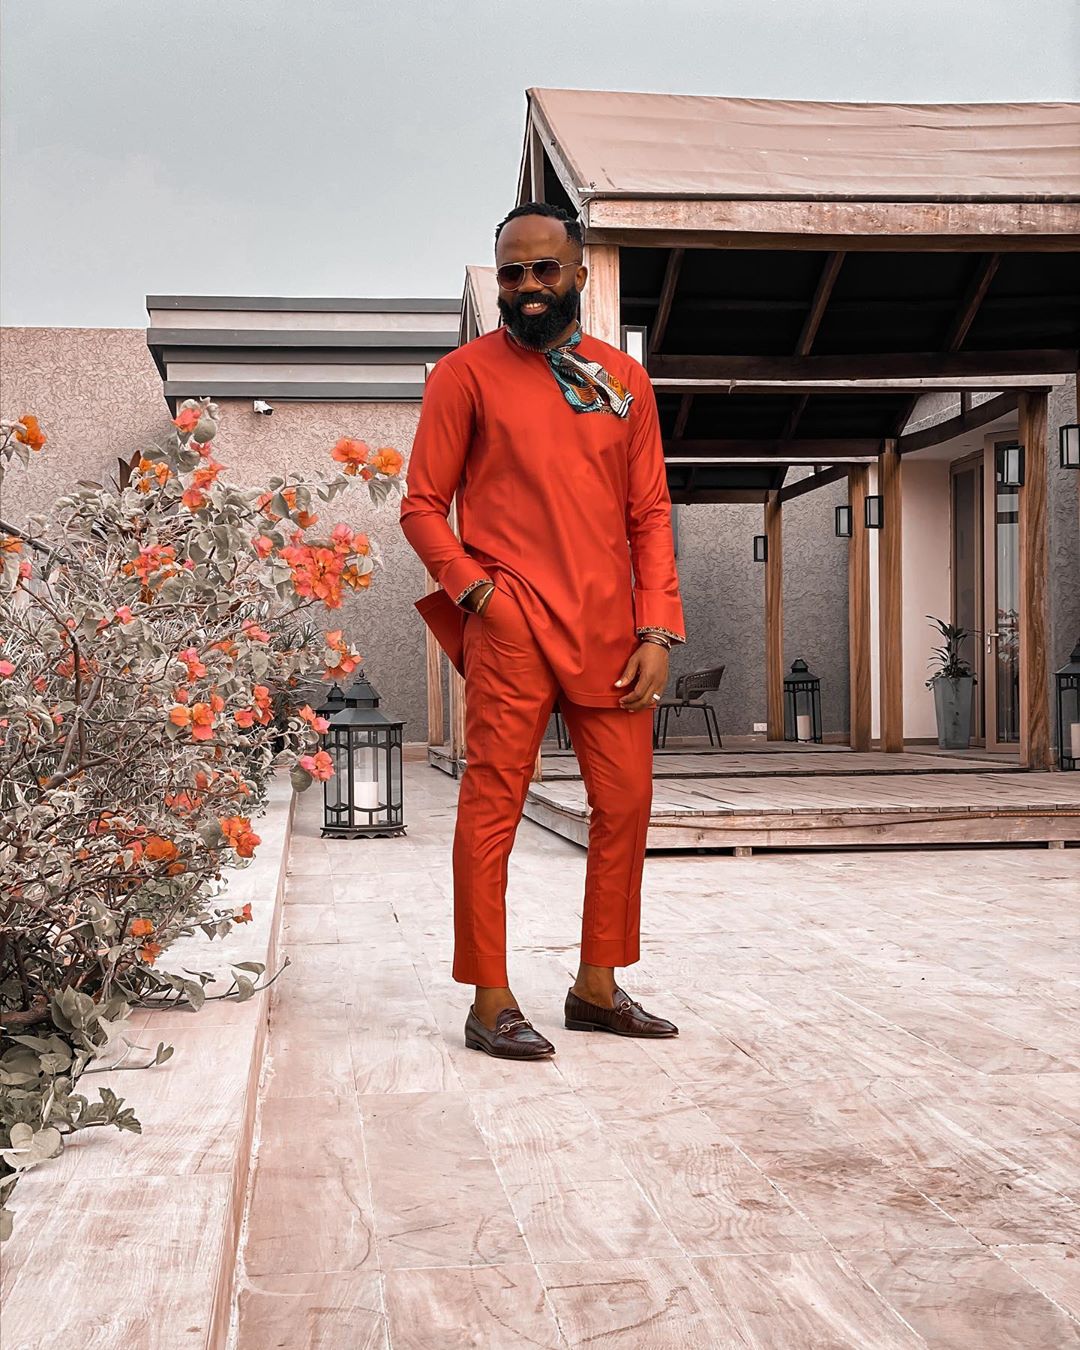 Sending money to parents is a scam, Noble Igwe says